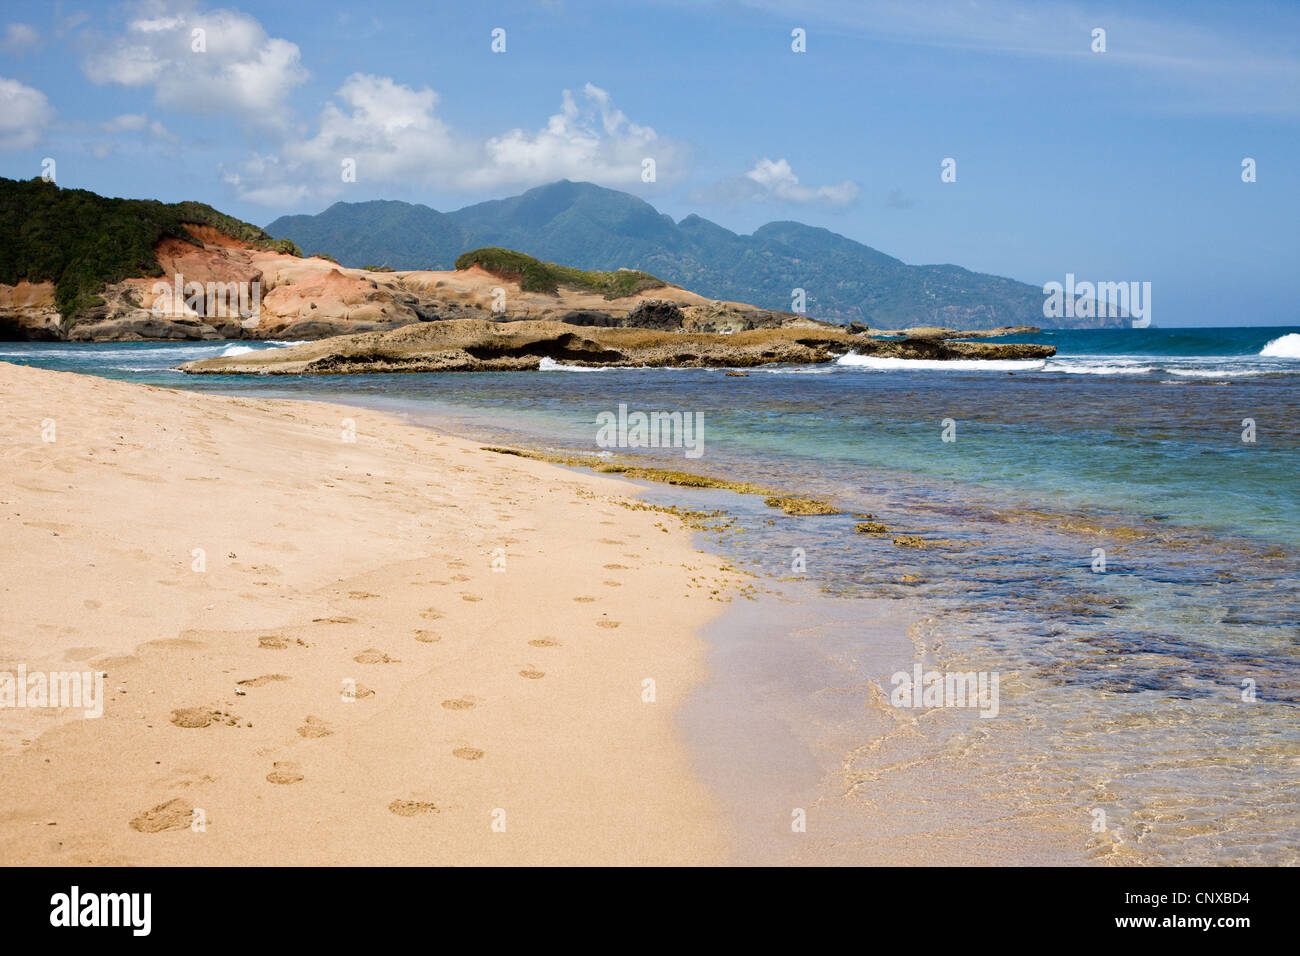 The beach at Pointe Baptiste near Callibishie on the north east coast of Dominica Stock Photo